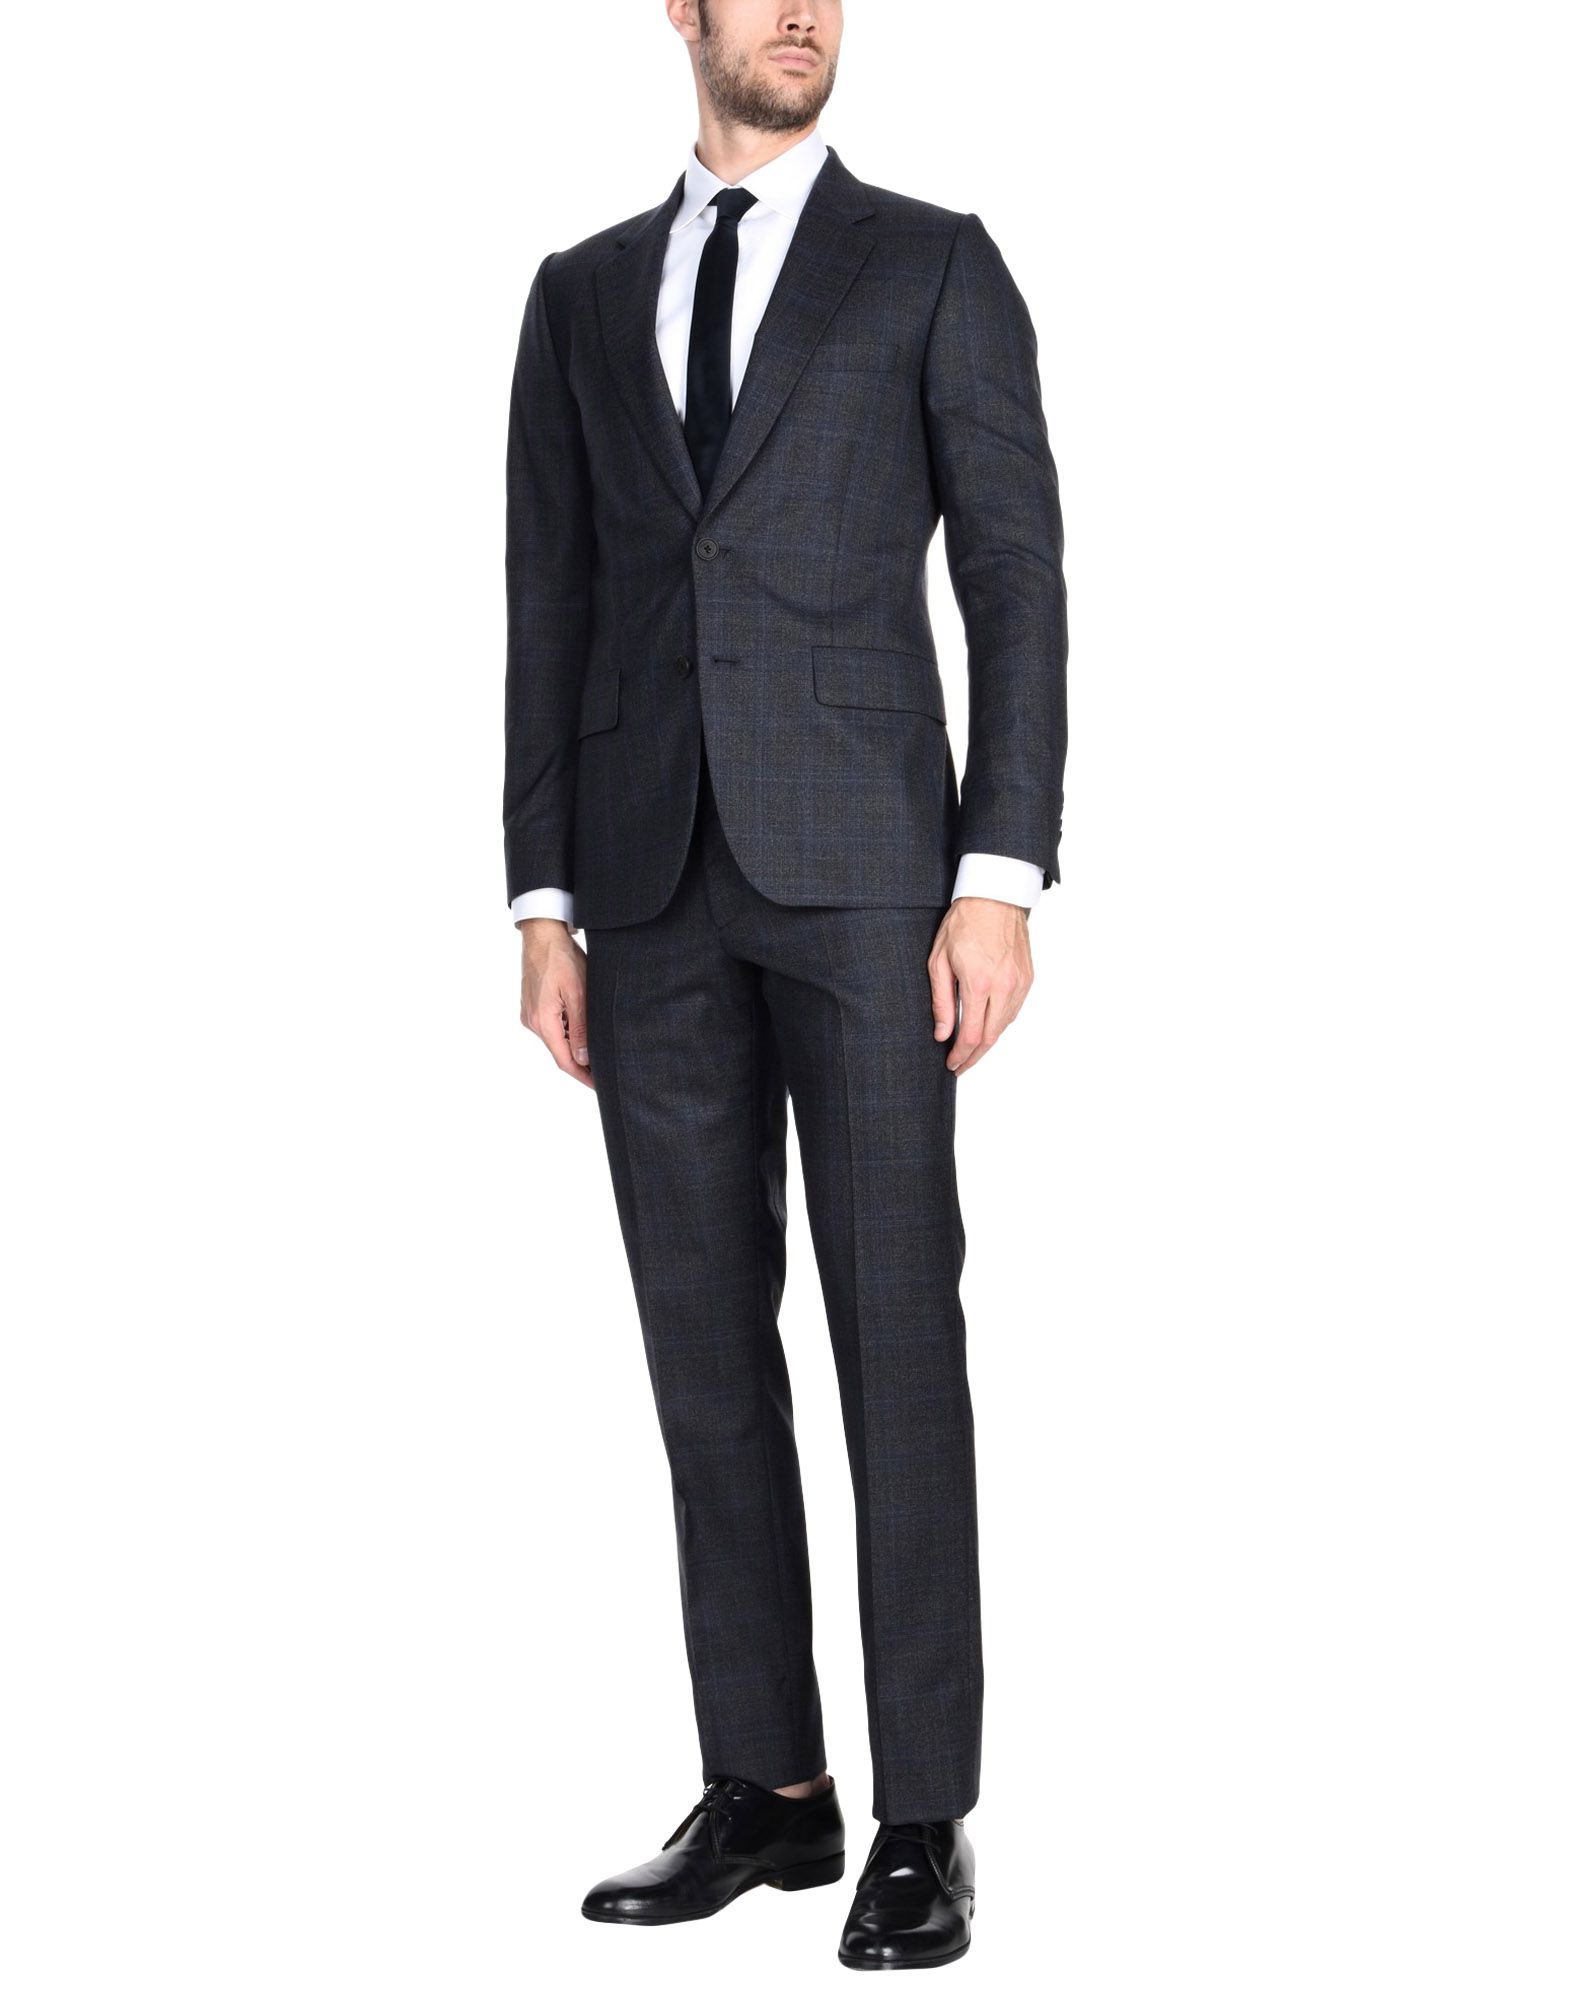 PAUL SMITH Suits,49394326TF 6